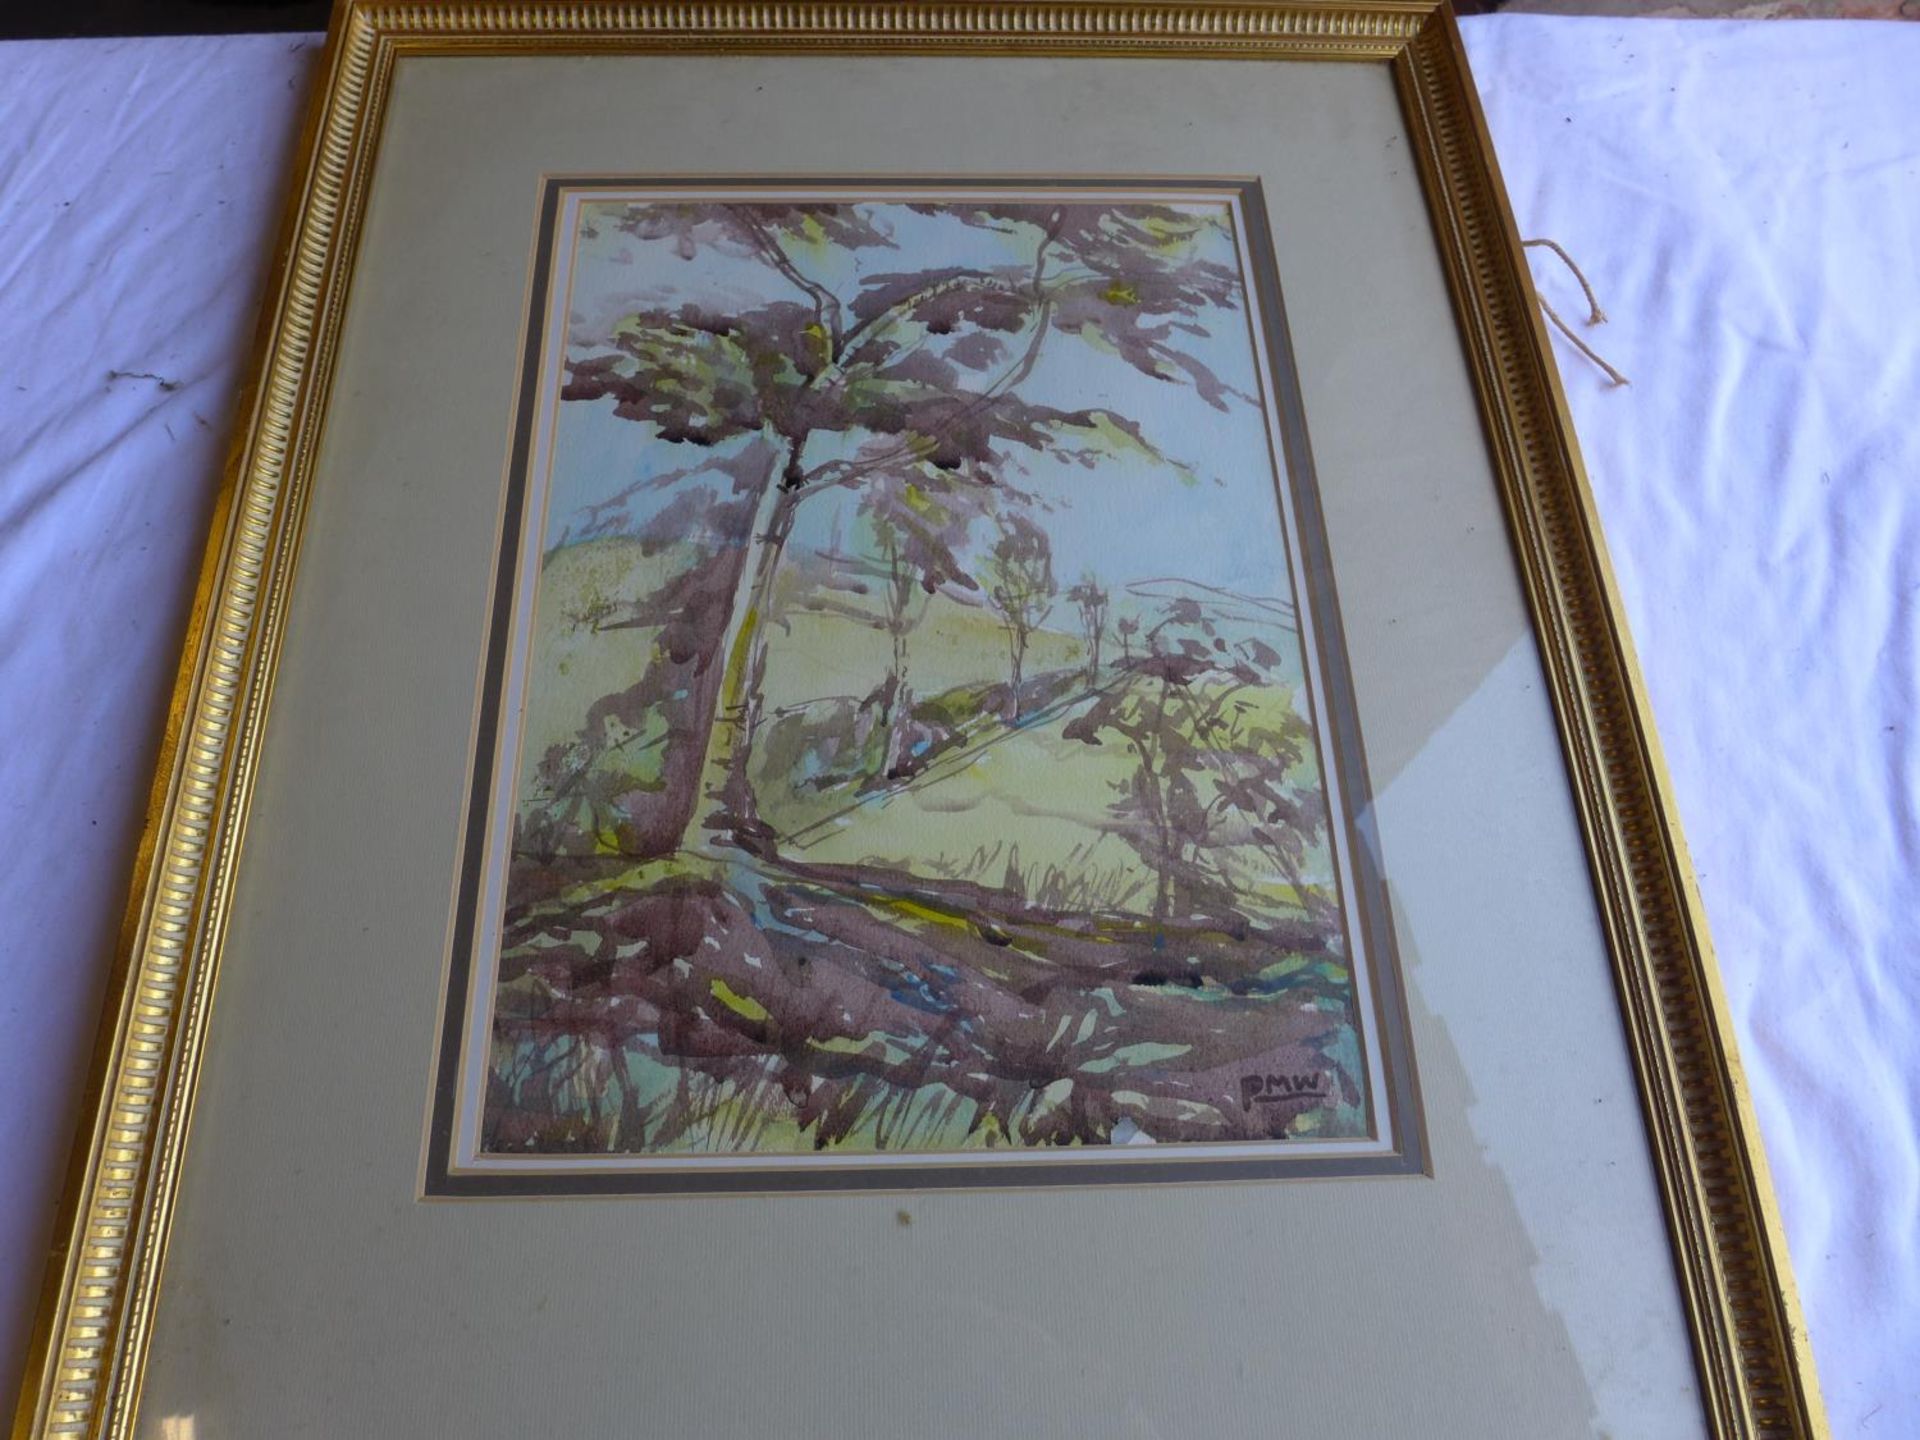 PAT WHITE, WOODLAND SCENE, WATERCOLOUR, BEARS INITIALS P.M.W., 38X27CM, FRAMED AND GLAZED, FROM